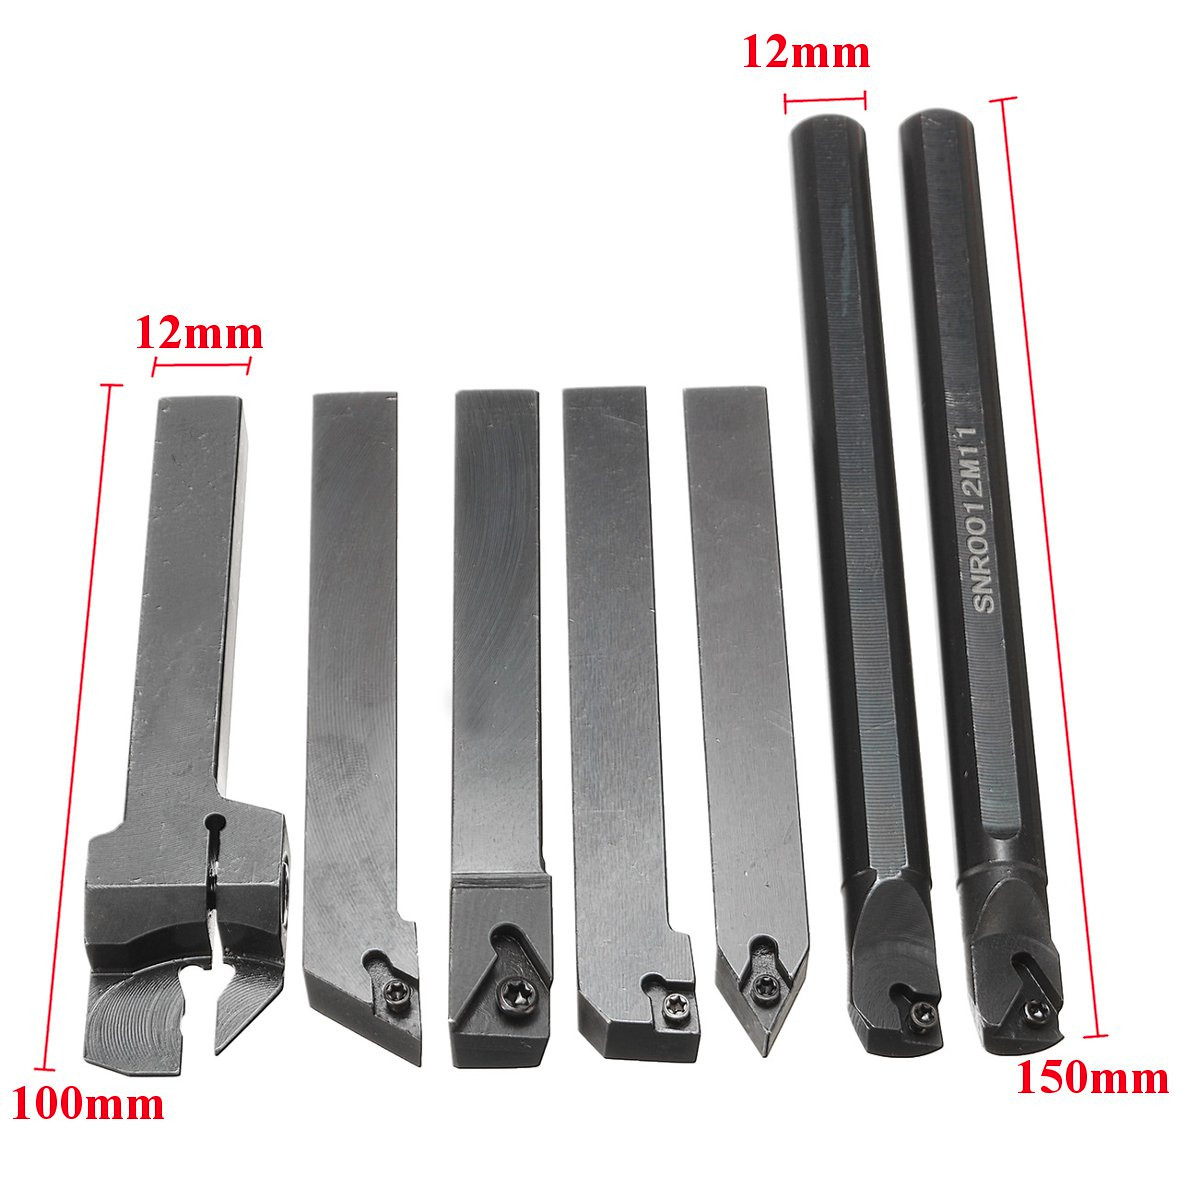 Drillpro-7pcs-12mm-Shank-Lathe-Set-Boring-Bar-Turning-Tool-Holder-with-Carbide-Inserts-CCMT060204-DC-1150453-1